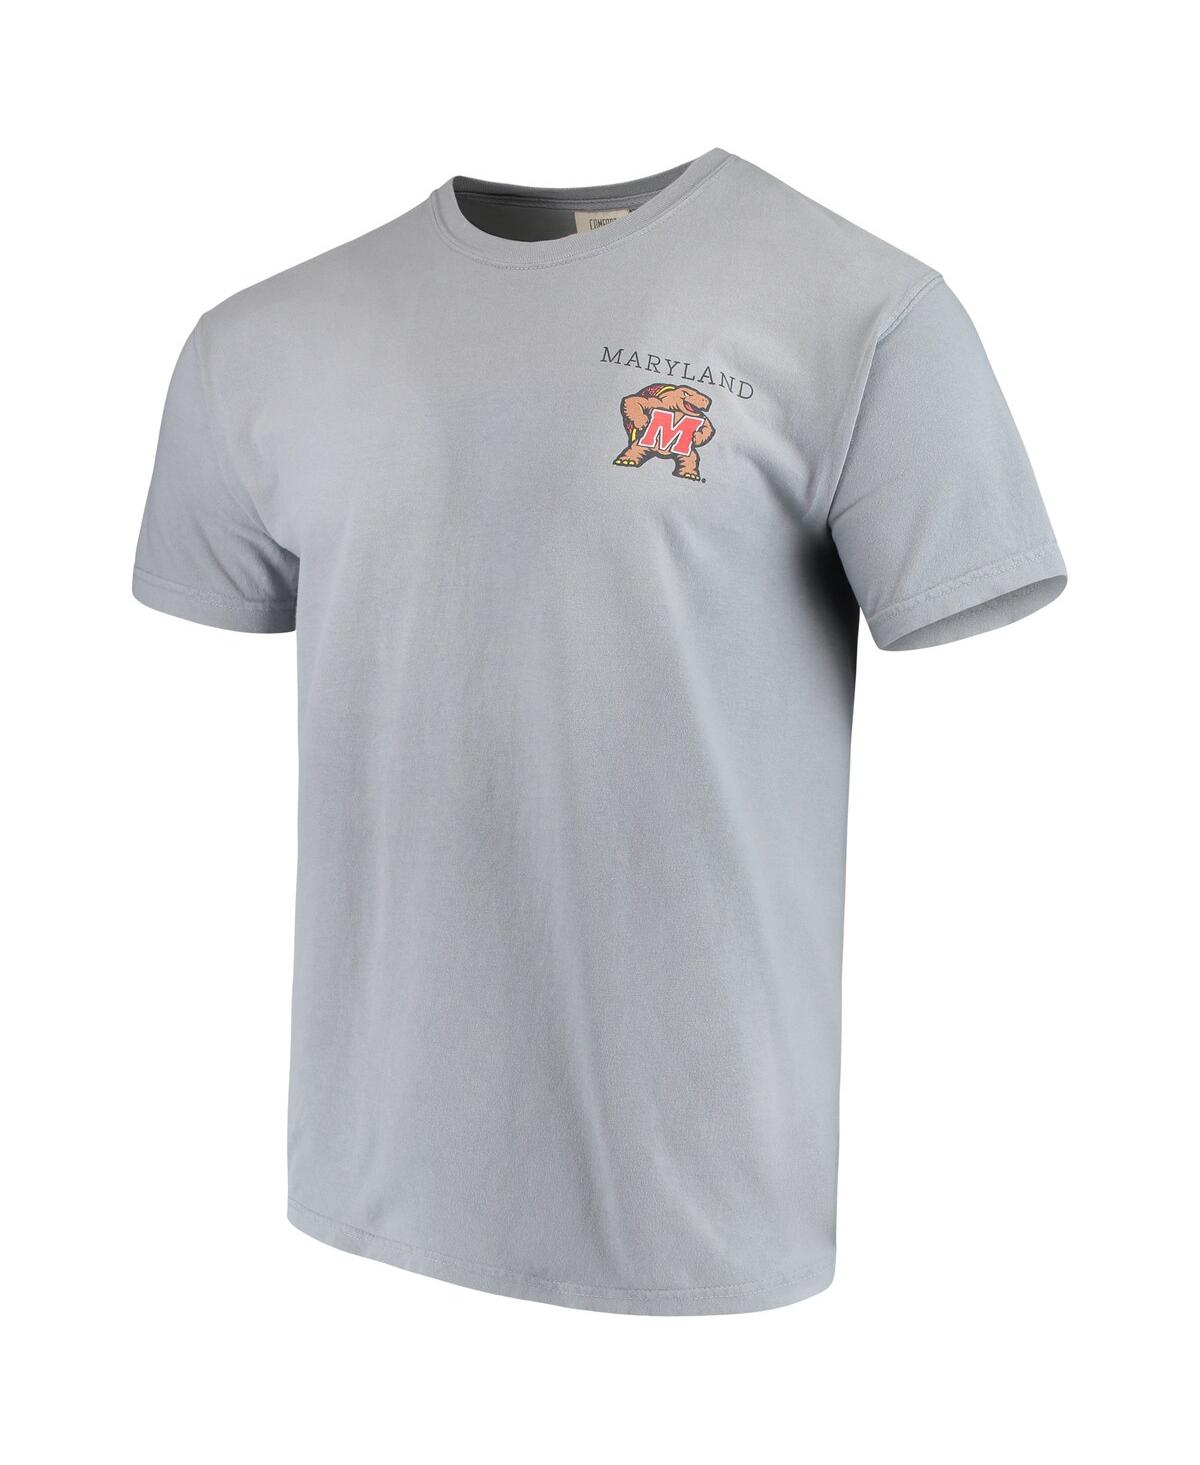 Shop Image One Men's Gray Maryland Terrapins Team Comfort Colors Campus Scenery T-shirt